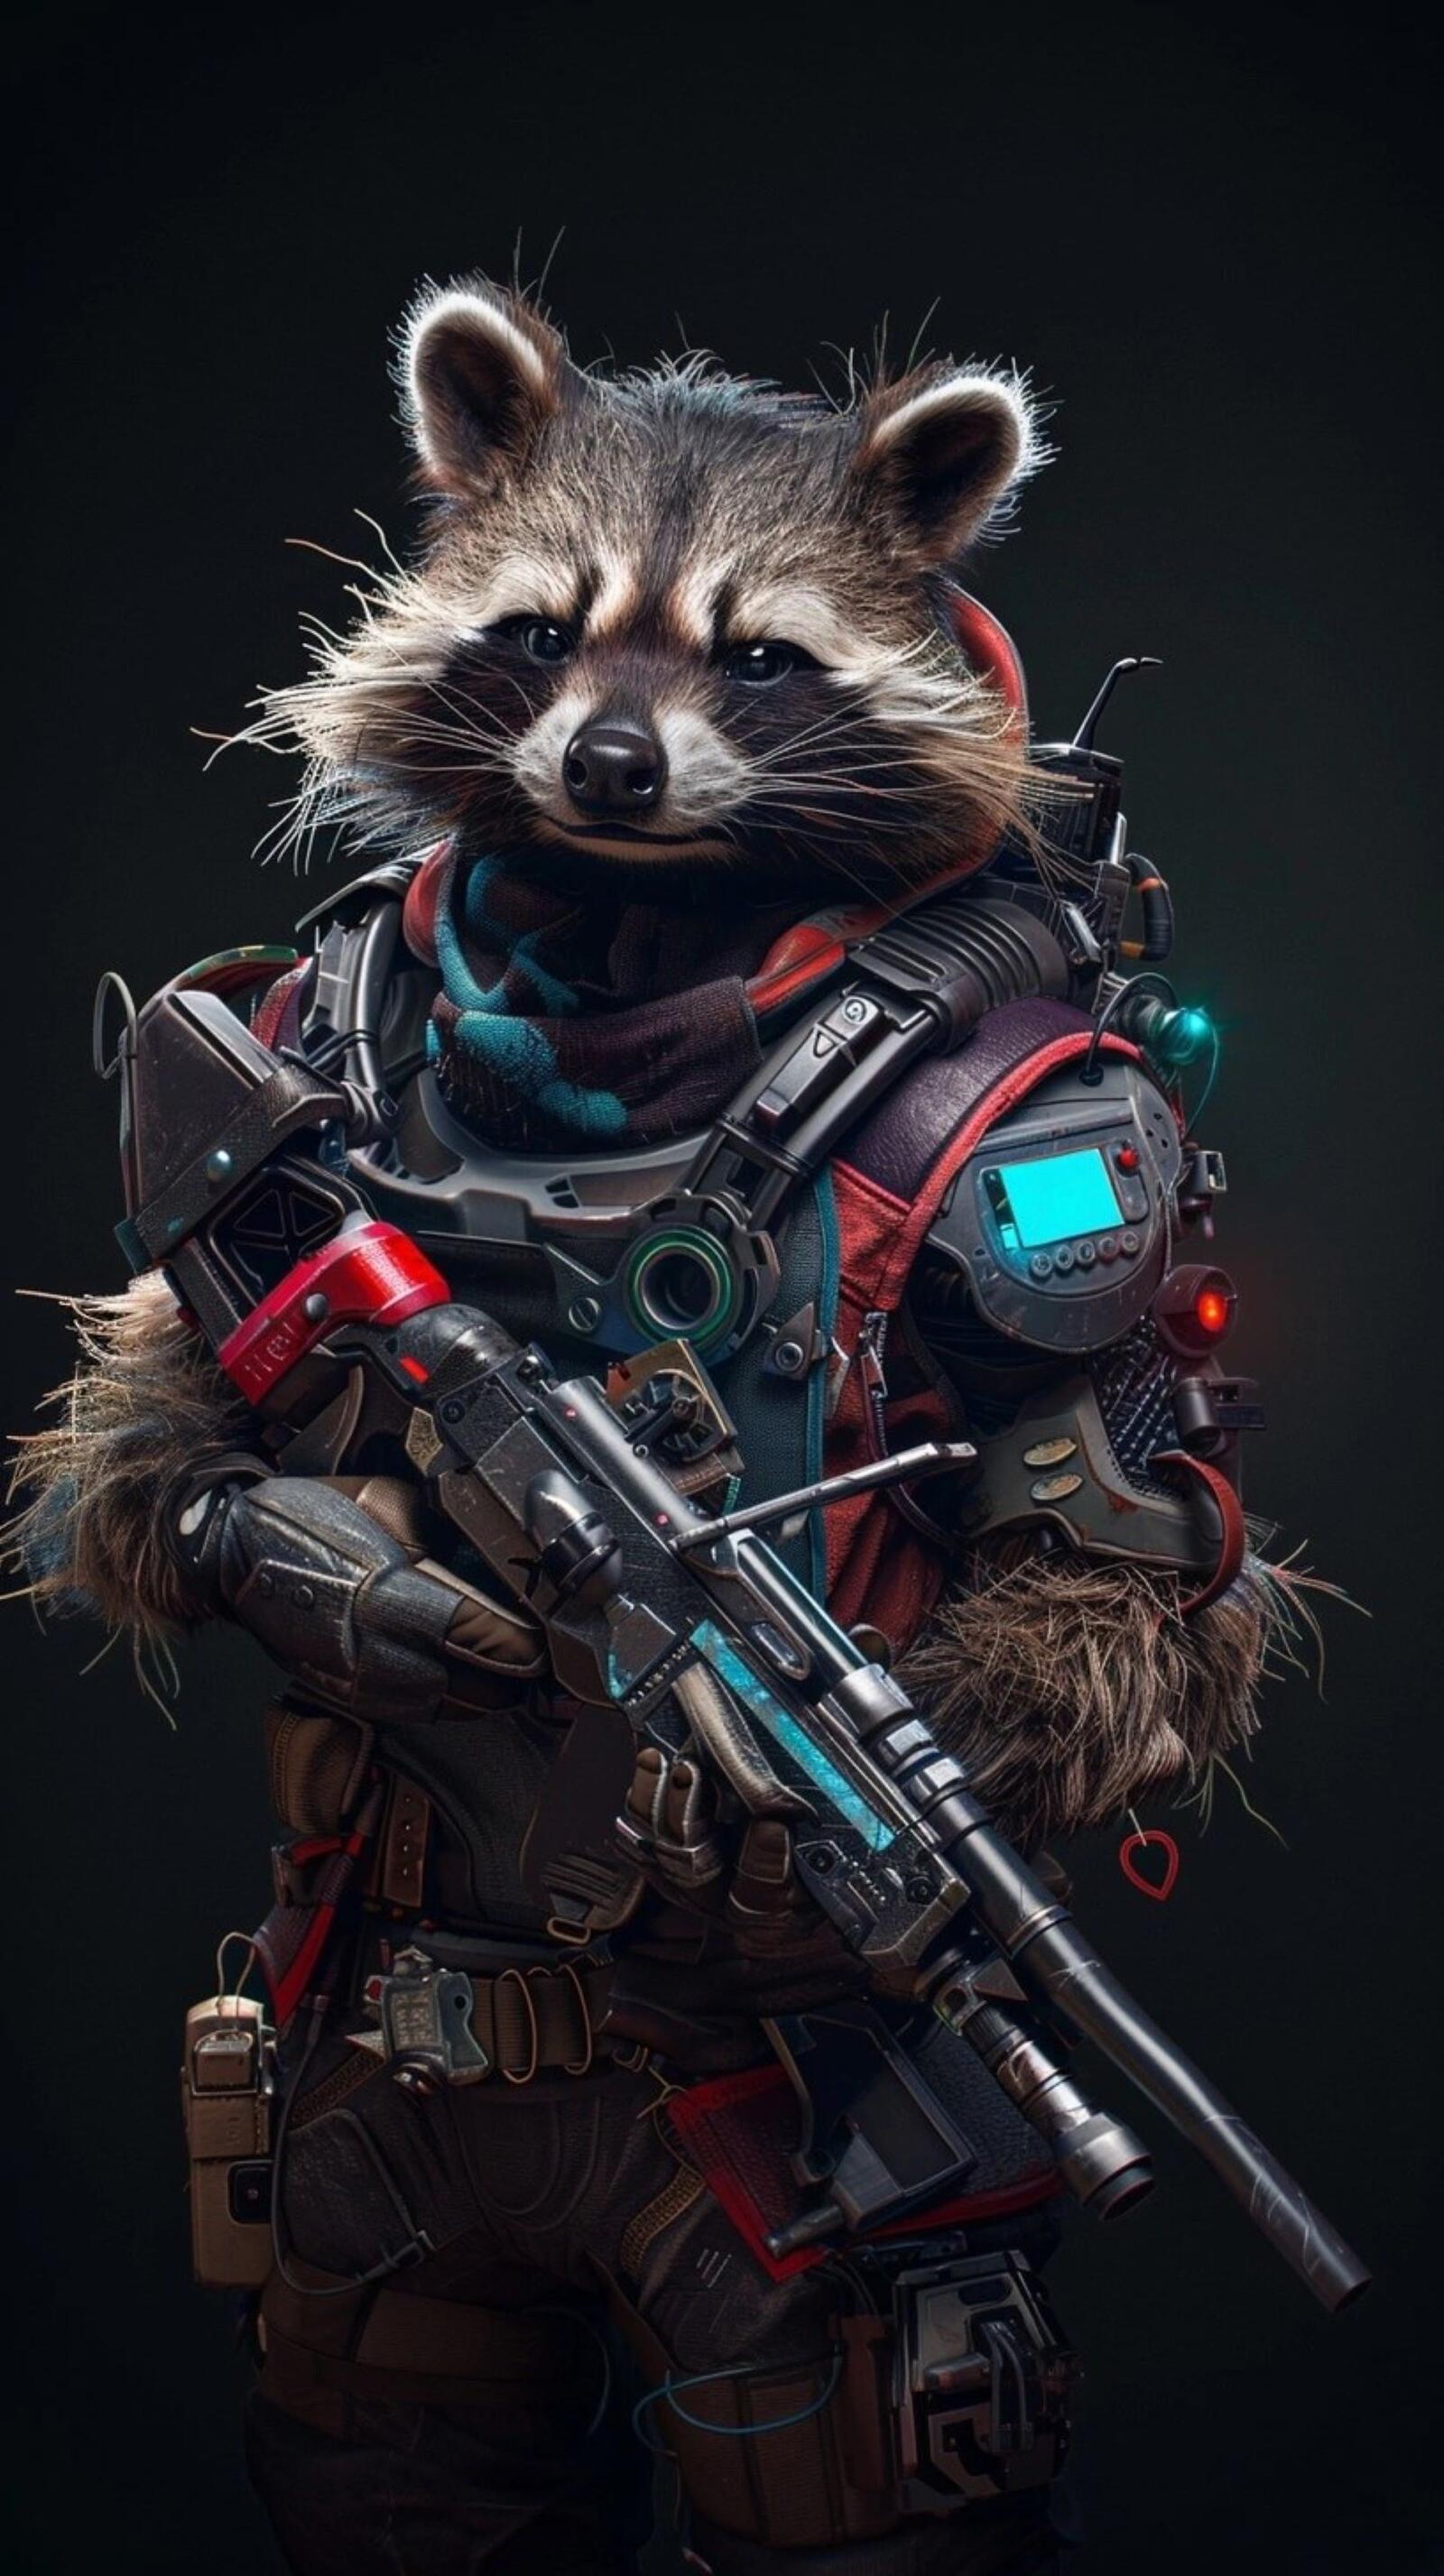 Free photo Rocket. Guardians of the galaxy